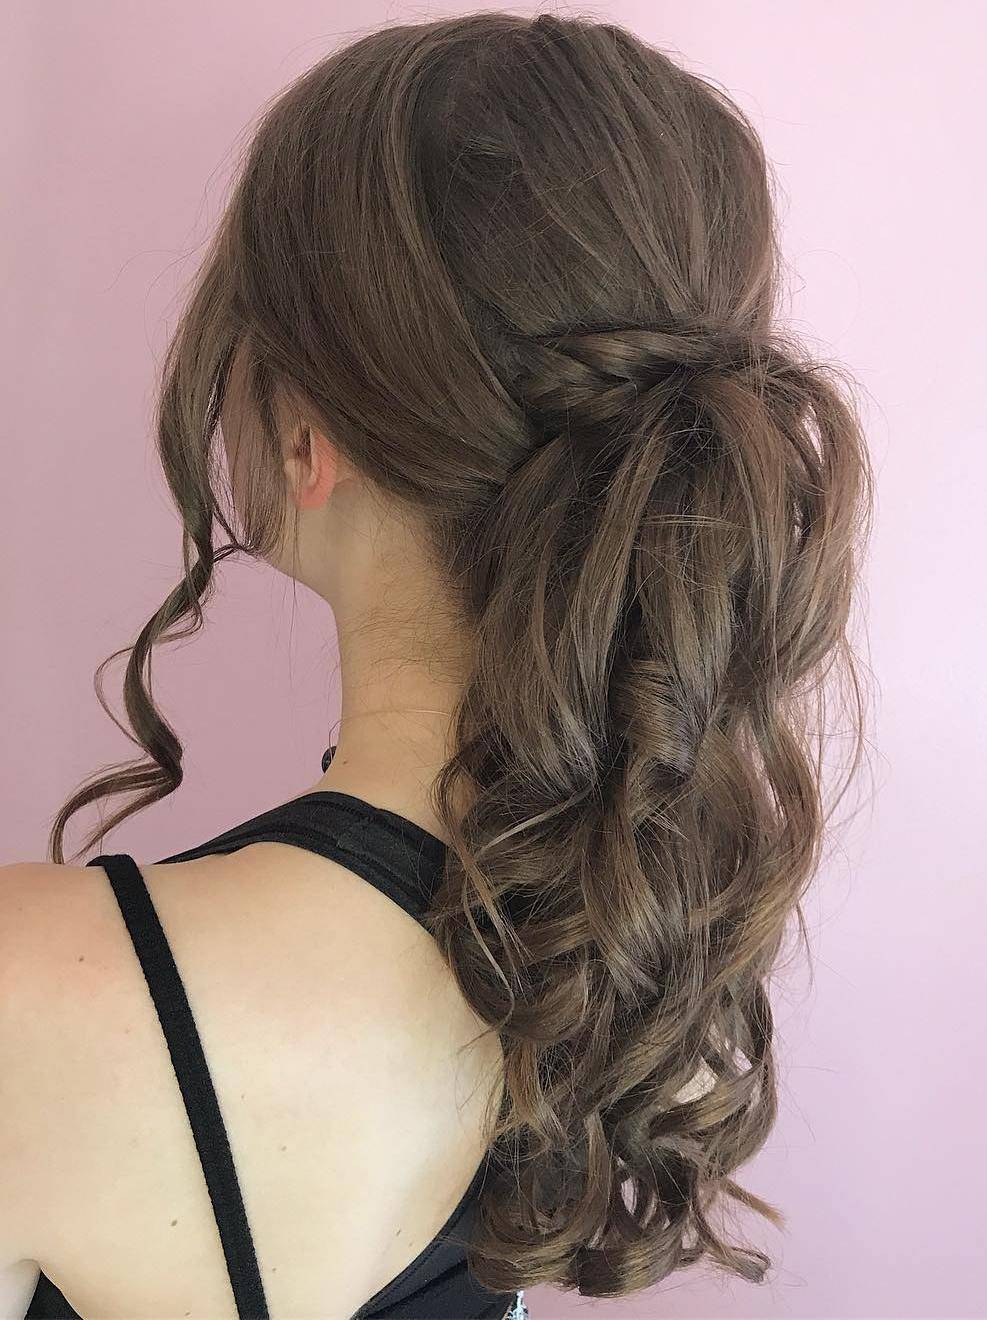 40 Top Long Hairstyles for Women to Keep up with Trends in 2021